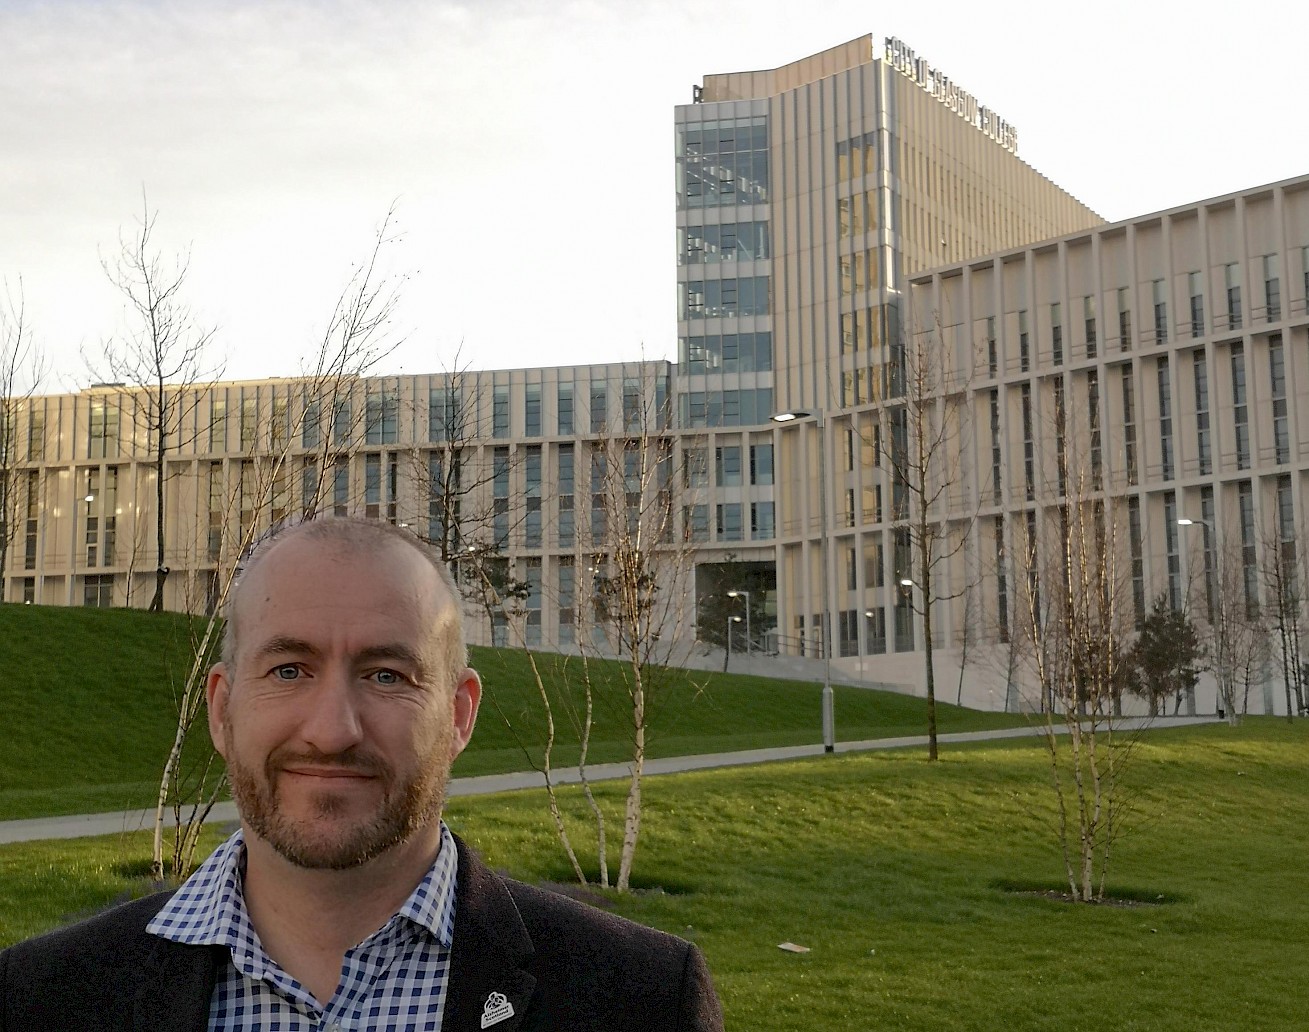 Image of John outside the City of Glasgow College.